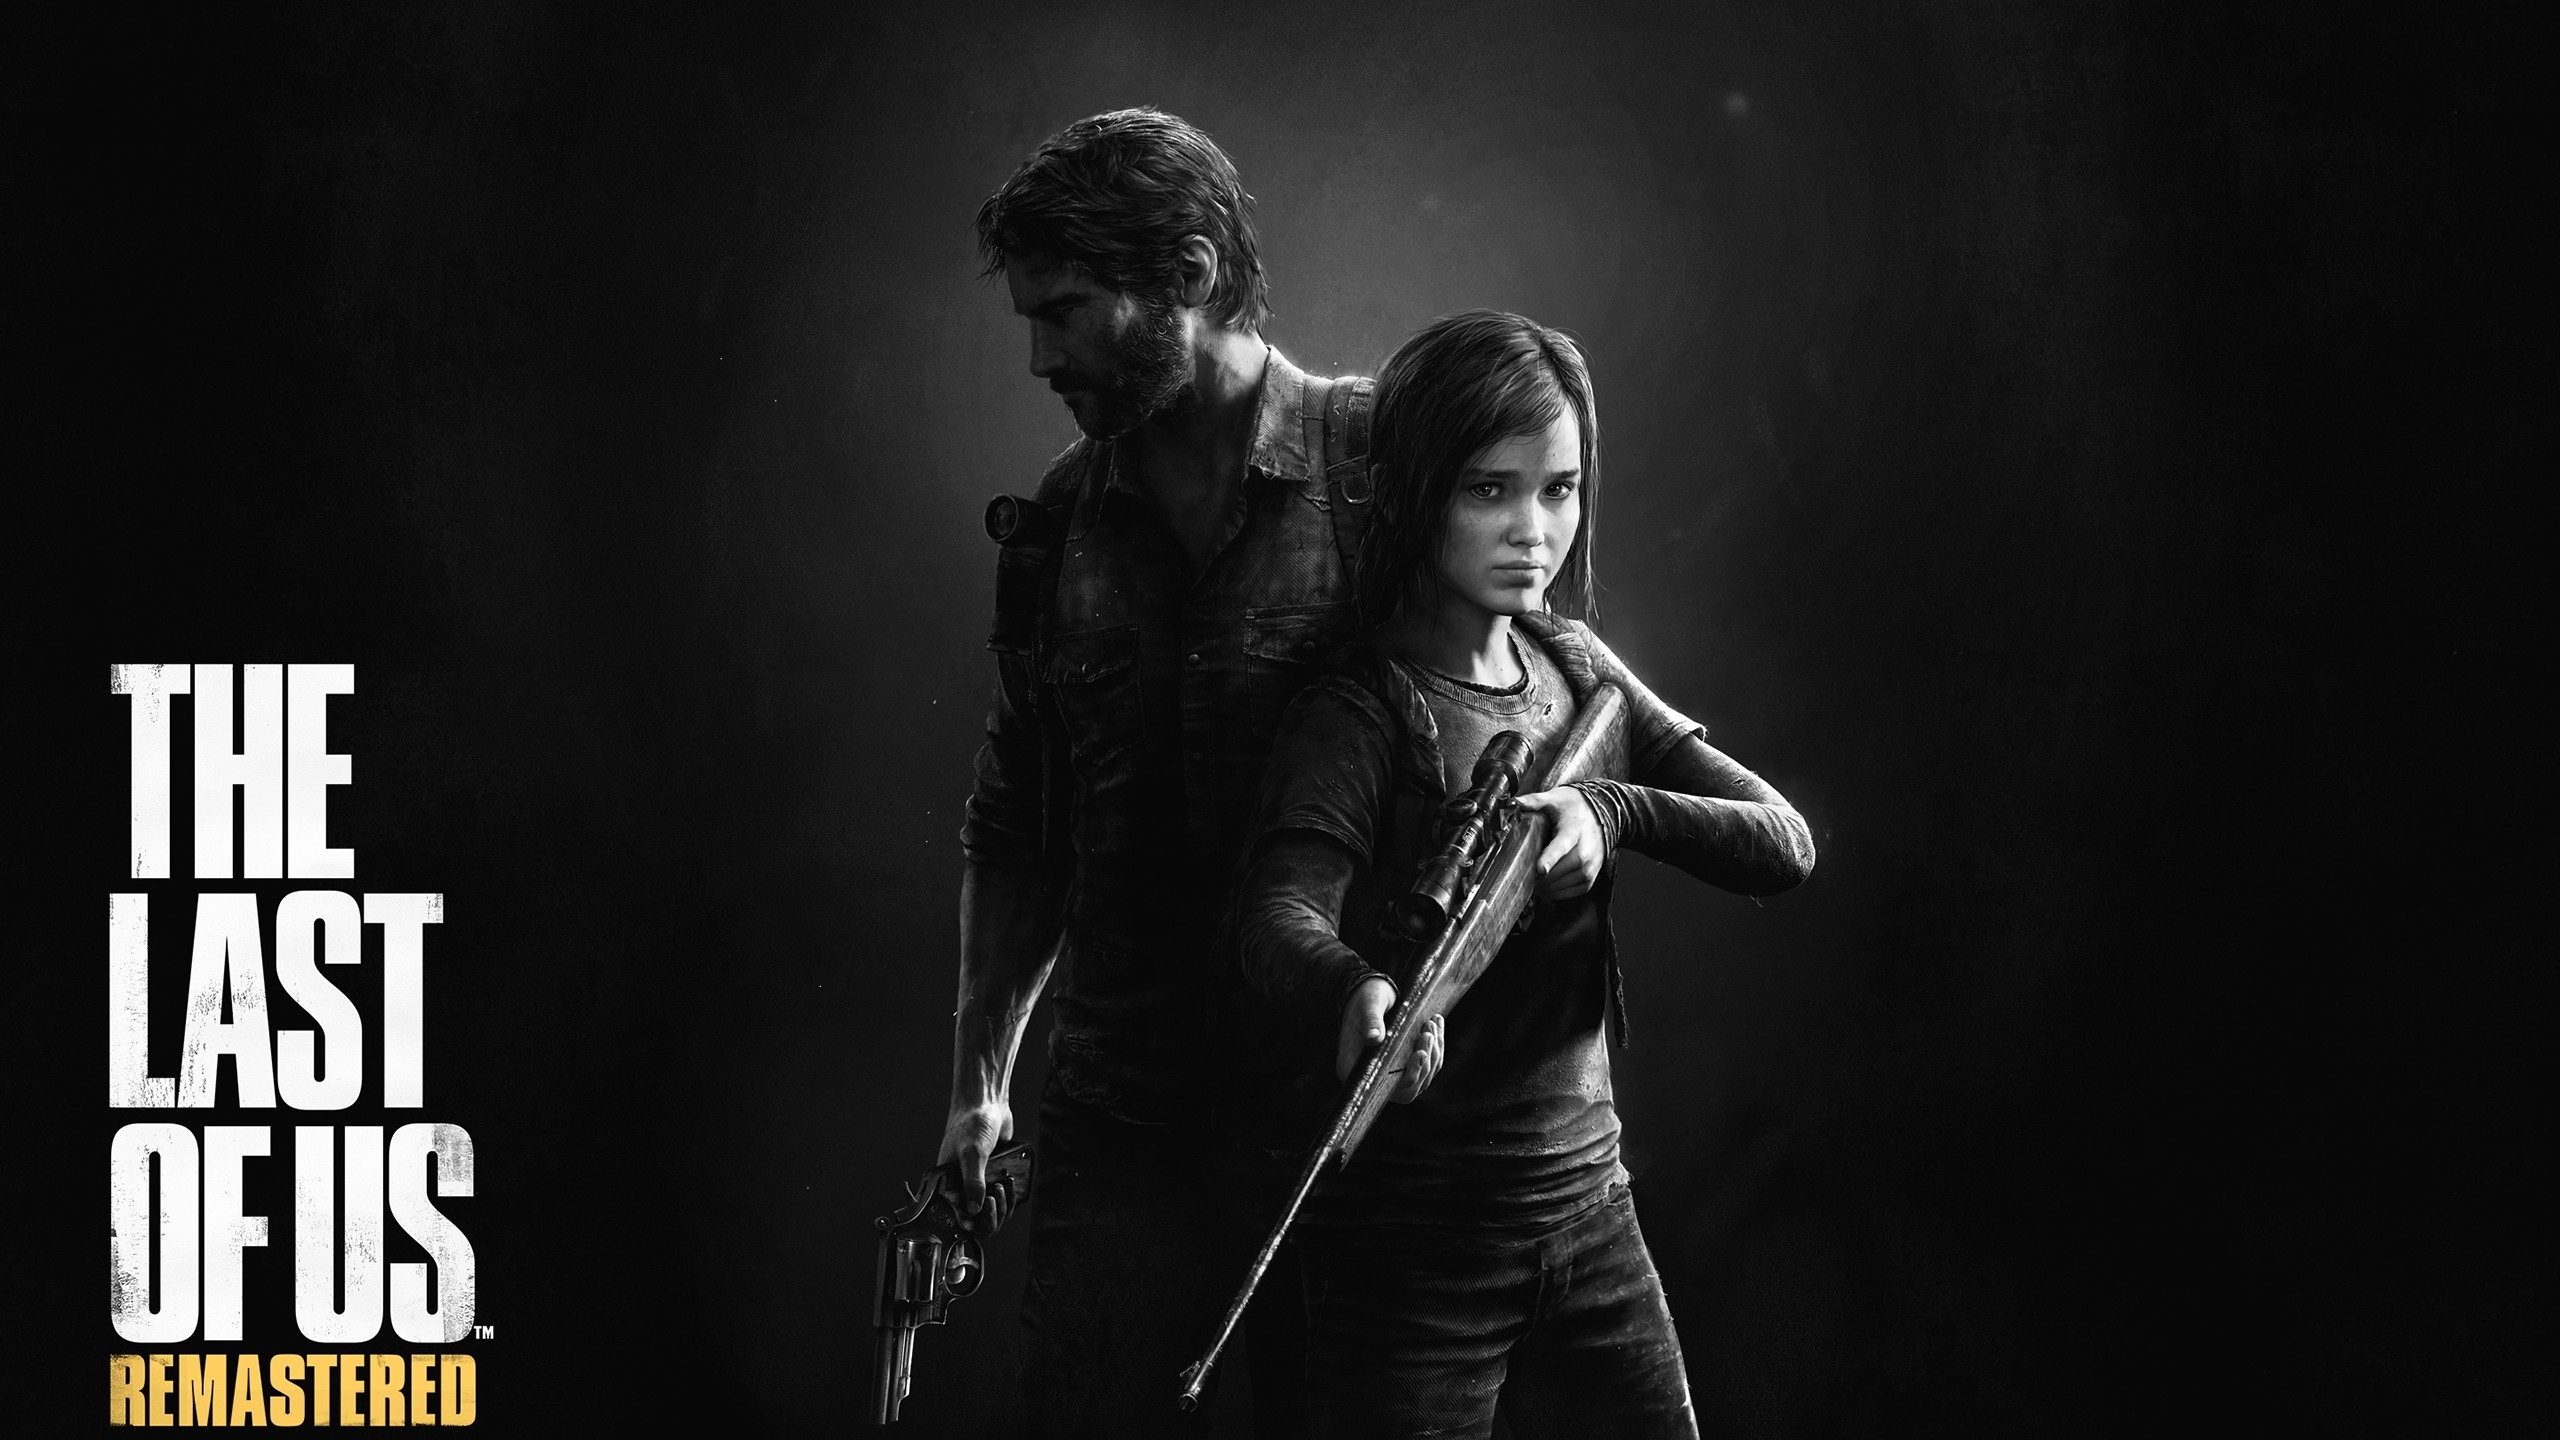 The Last of Us Remastered for 2560x1440 HDTV resolution